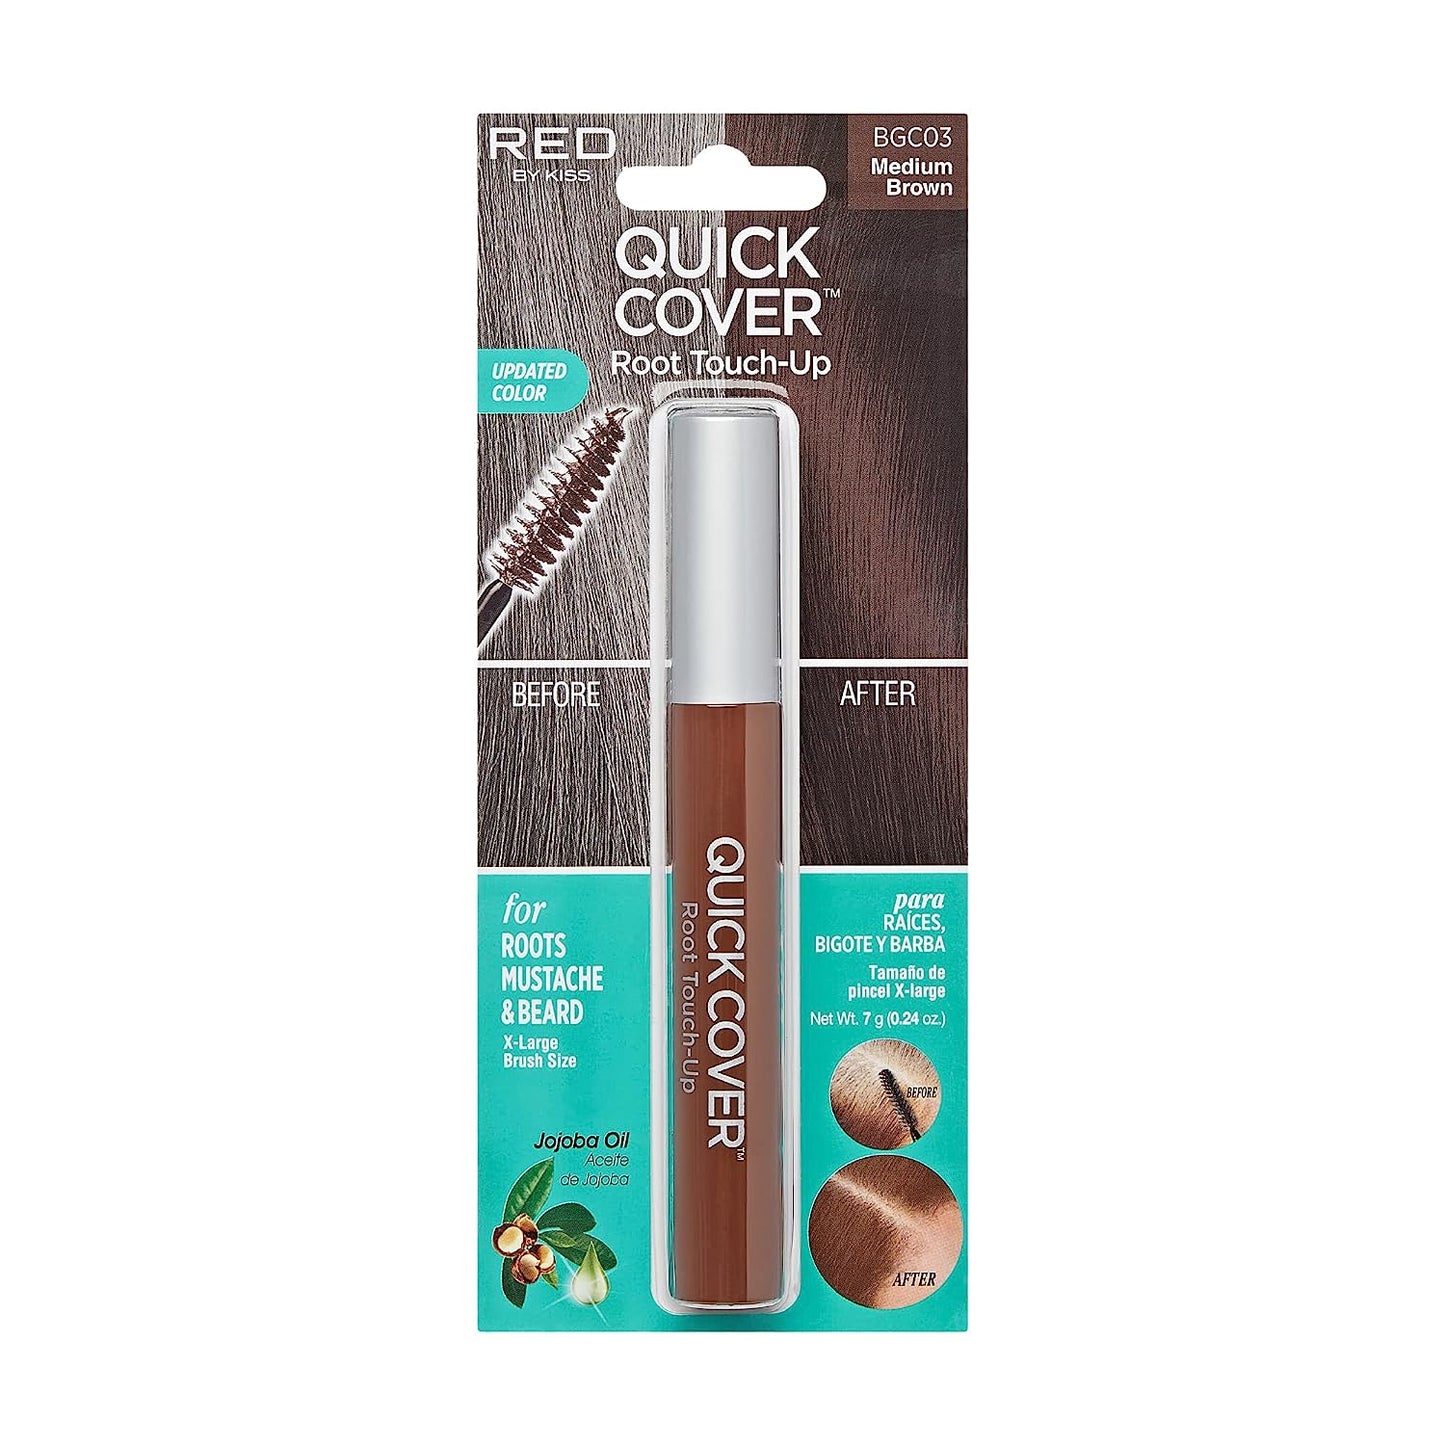 RED by Kiss Quick Cover Root Touch Up Mascara